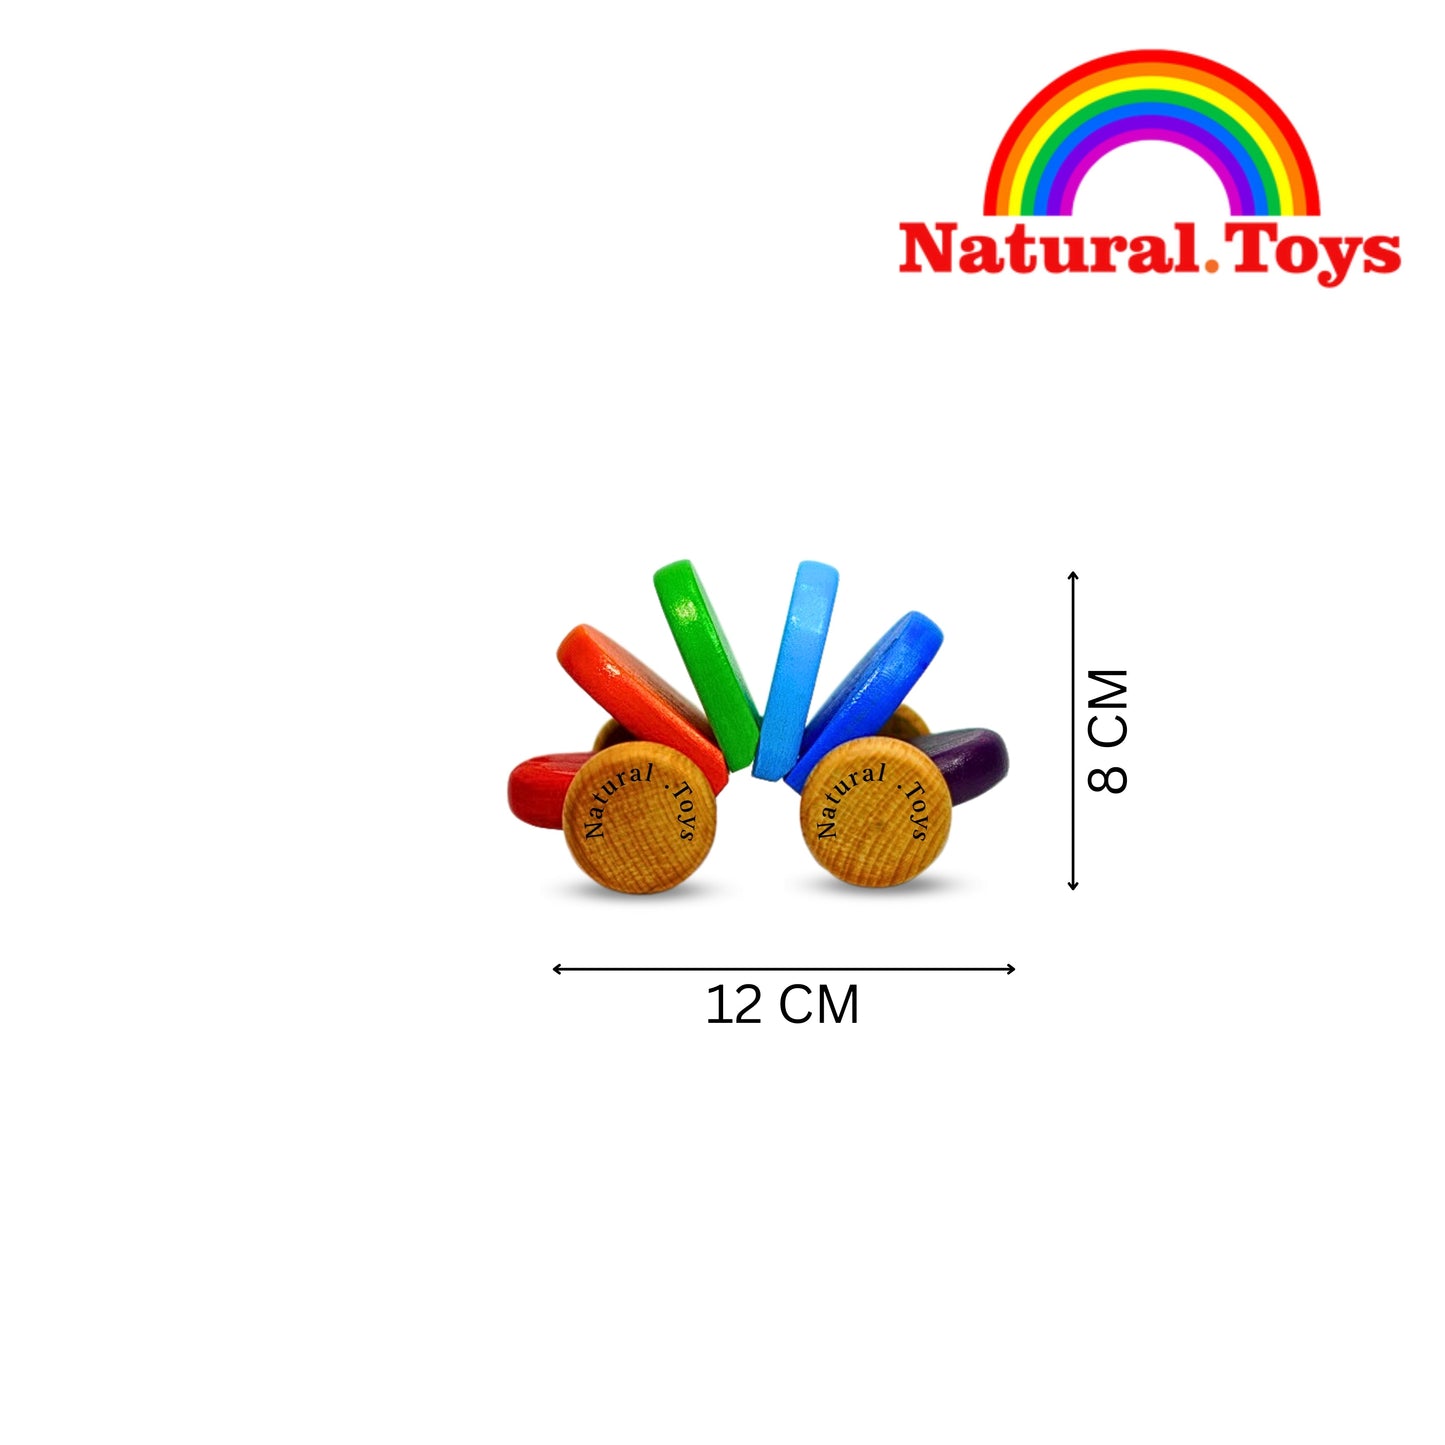 Buy Amazing Wooden Push Pull Toy Car | Award Winning Toy | Natural Toys